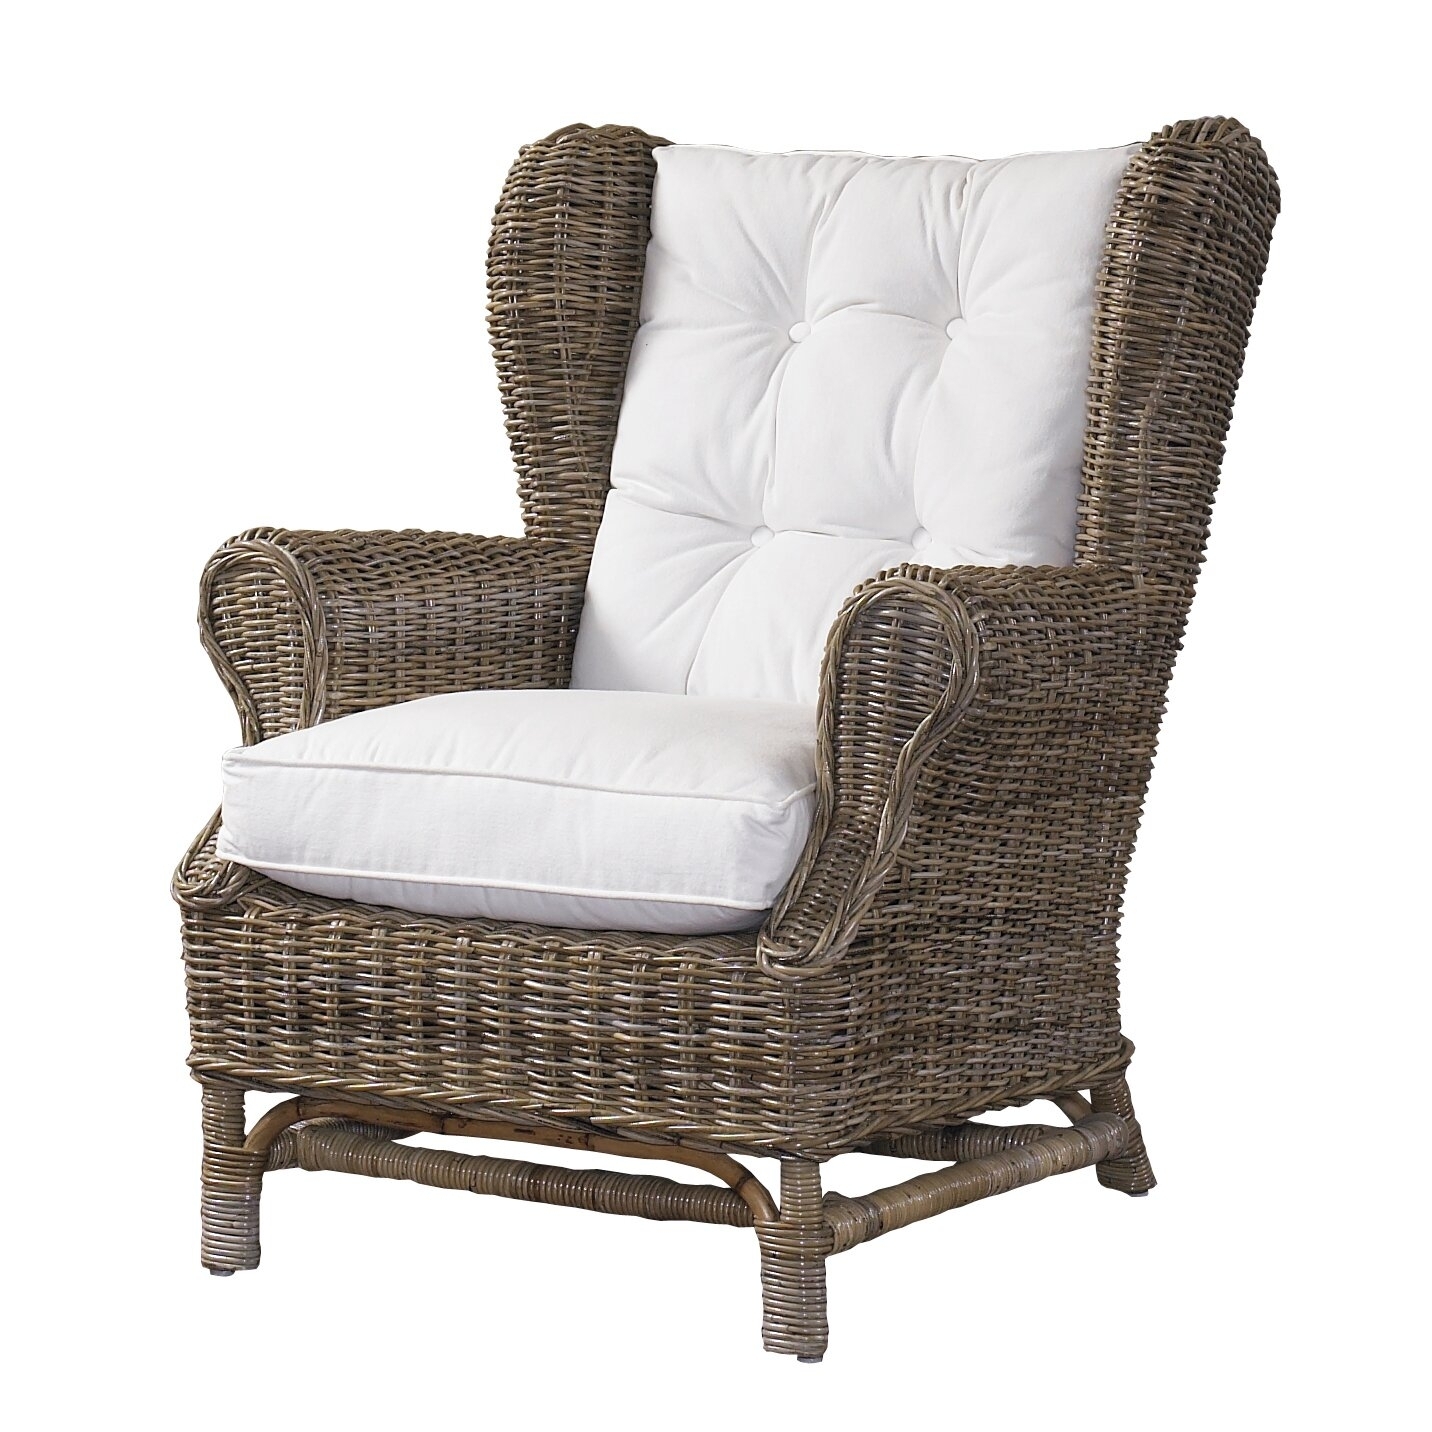 Featured image of post Wicker Wing Chairs : Shop wayfair for all the best wicker patio chairs.